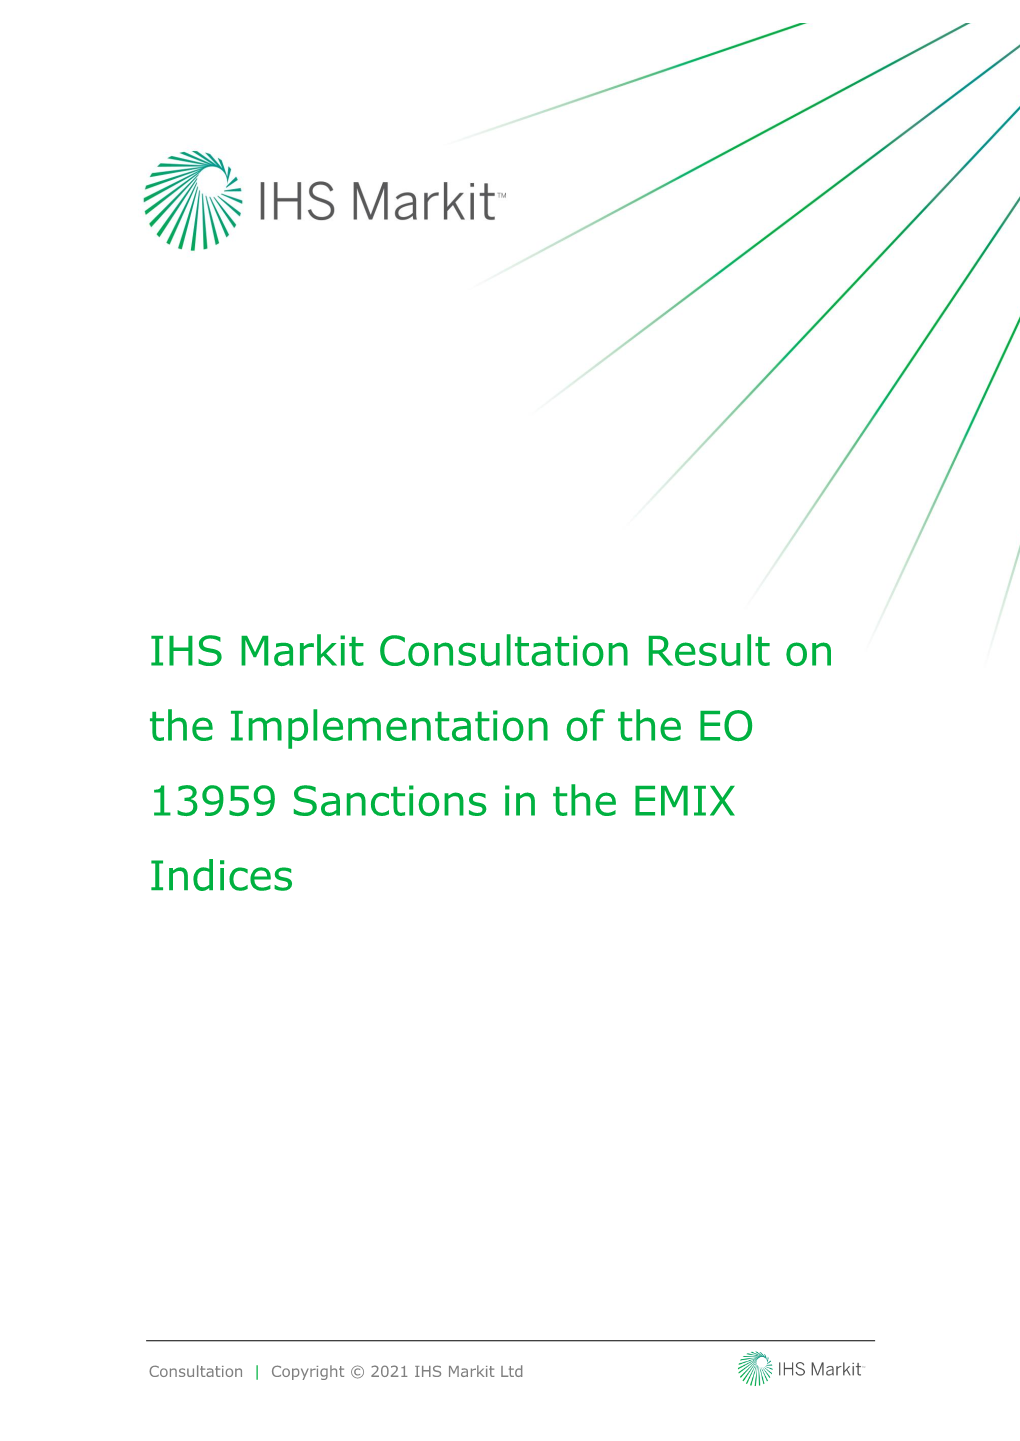 IHS Markit Consultation Result on the Implementation of the EO 13959 Sanctions in the EMIX Indices